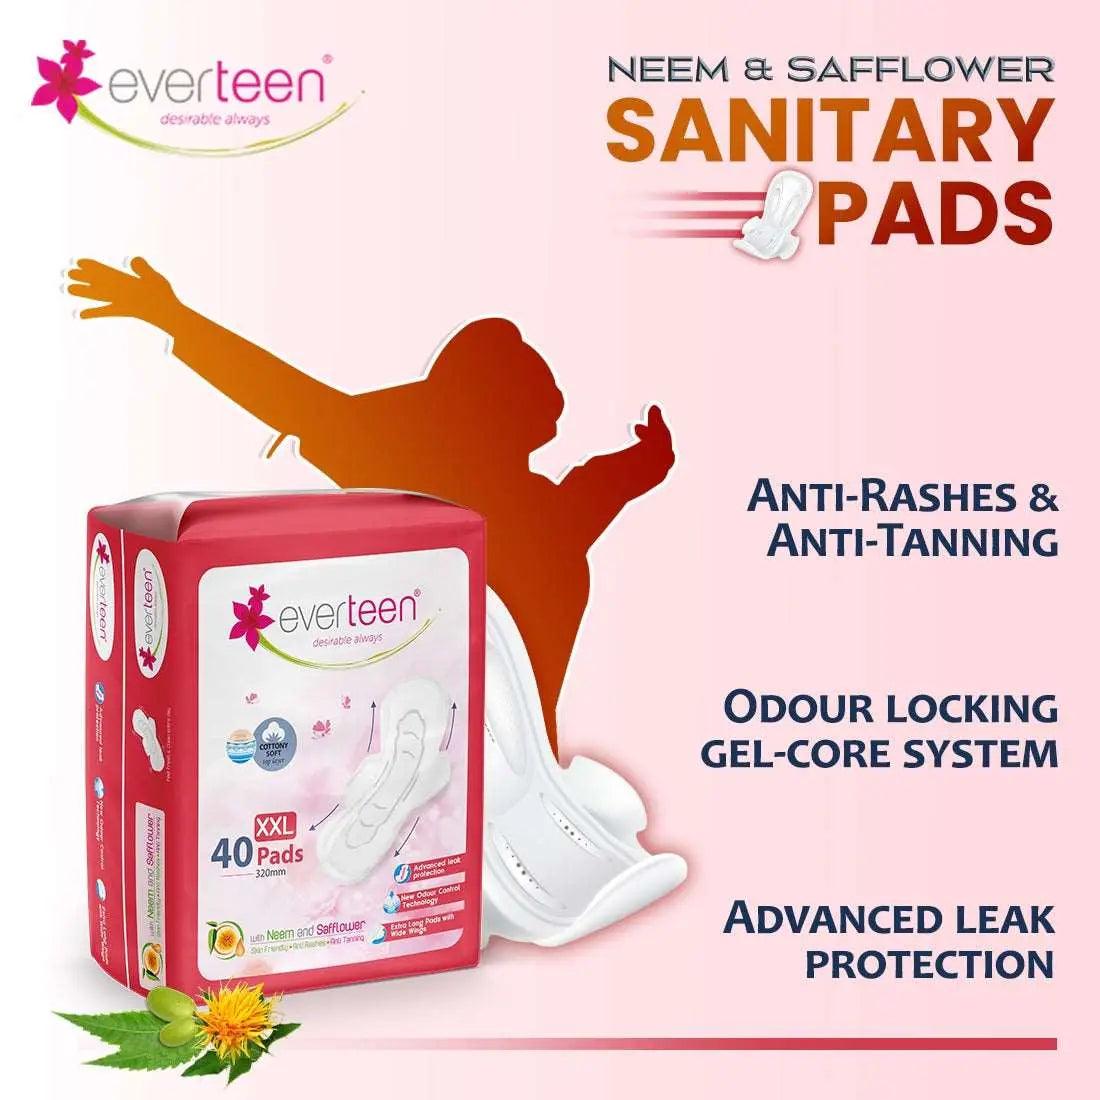 everteen Combo - XXL Neem Safflower Sanitary Pads and Menstrual Cramps Roll-On for Periods - 1 Each